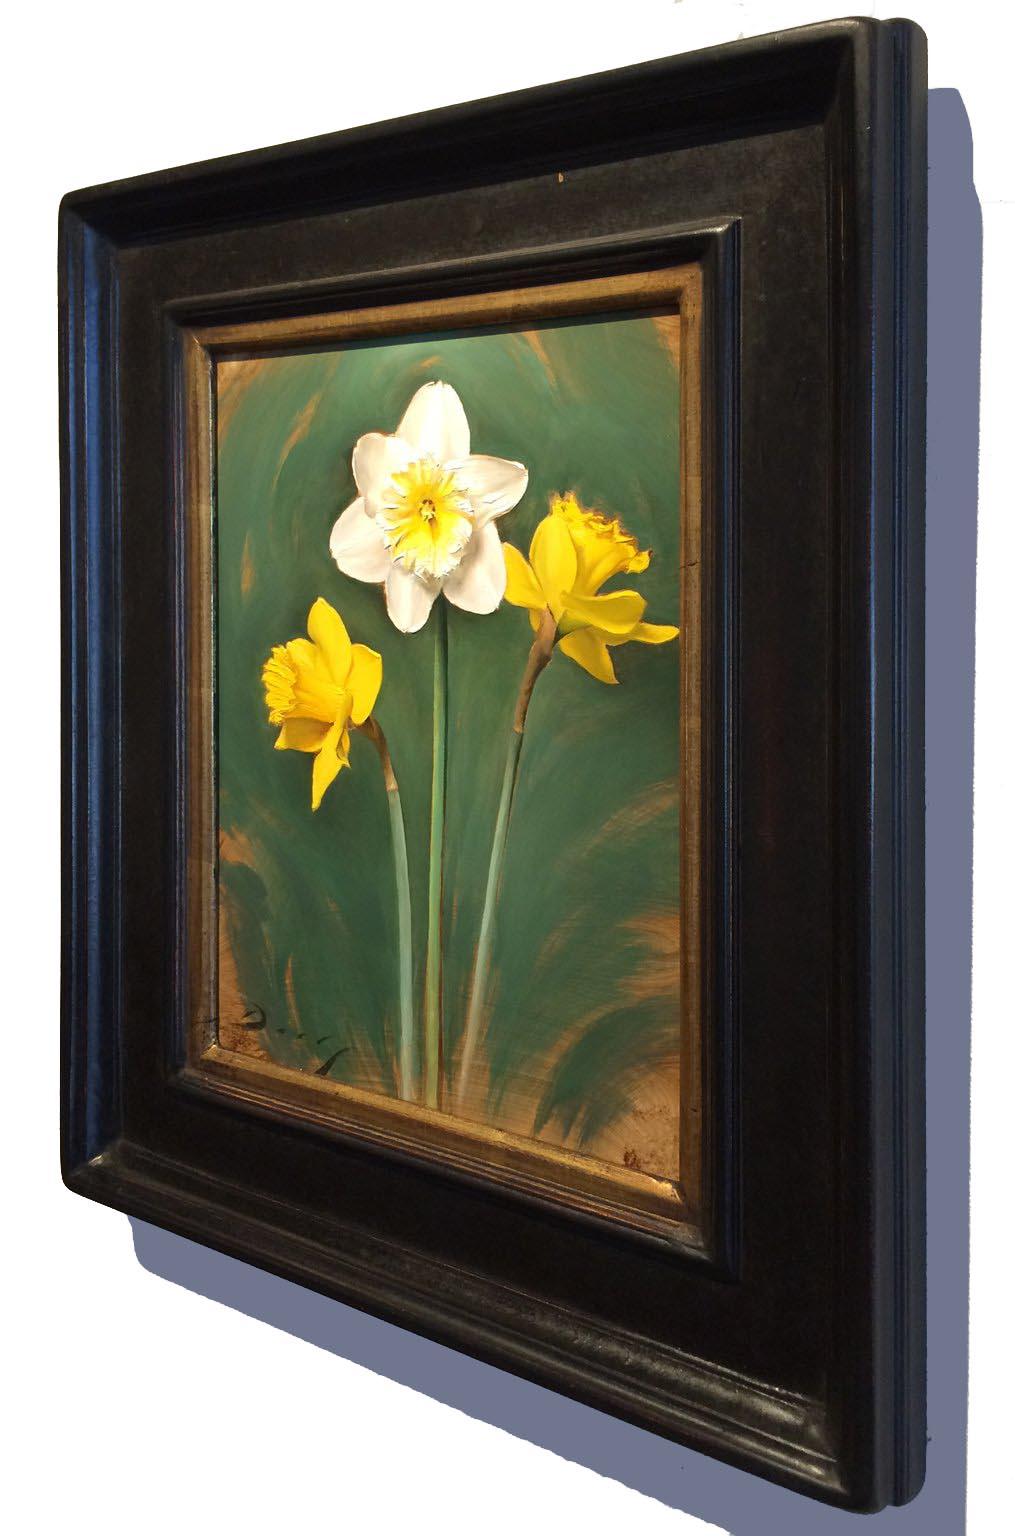 Realist yellow white and green flowers, 